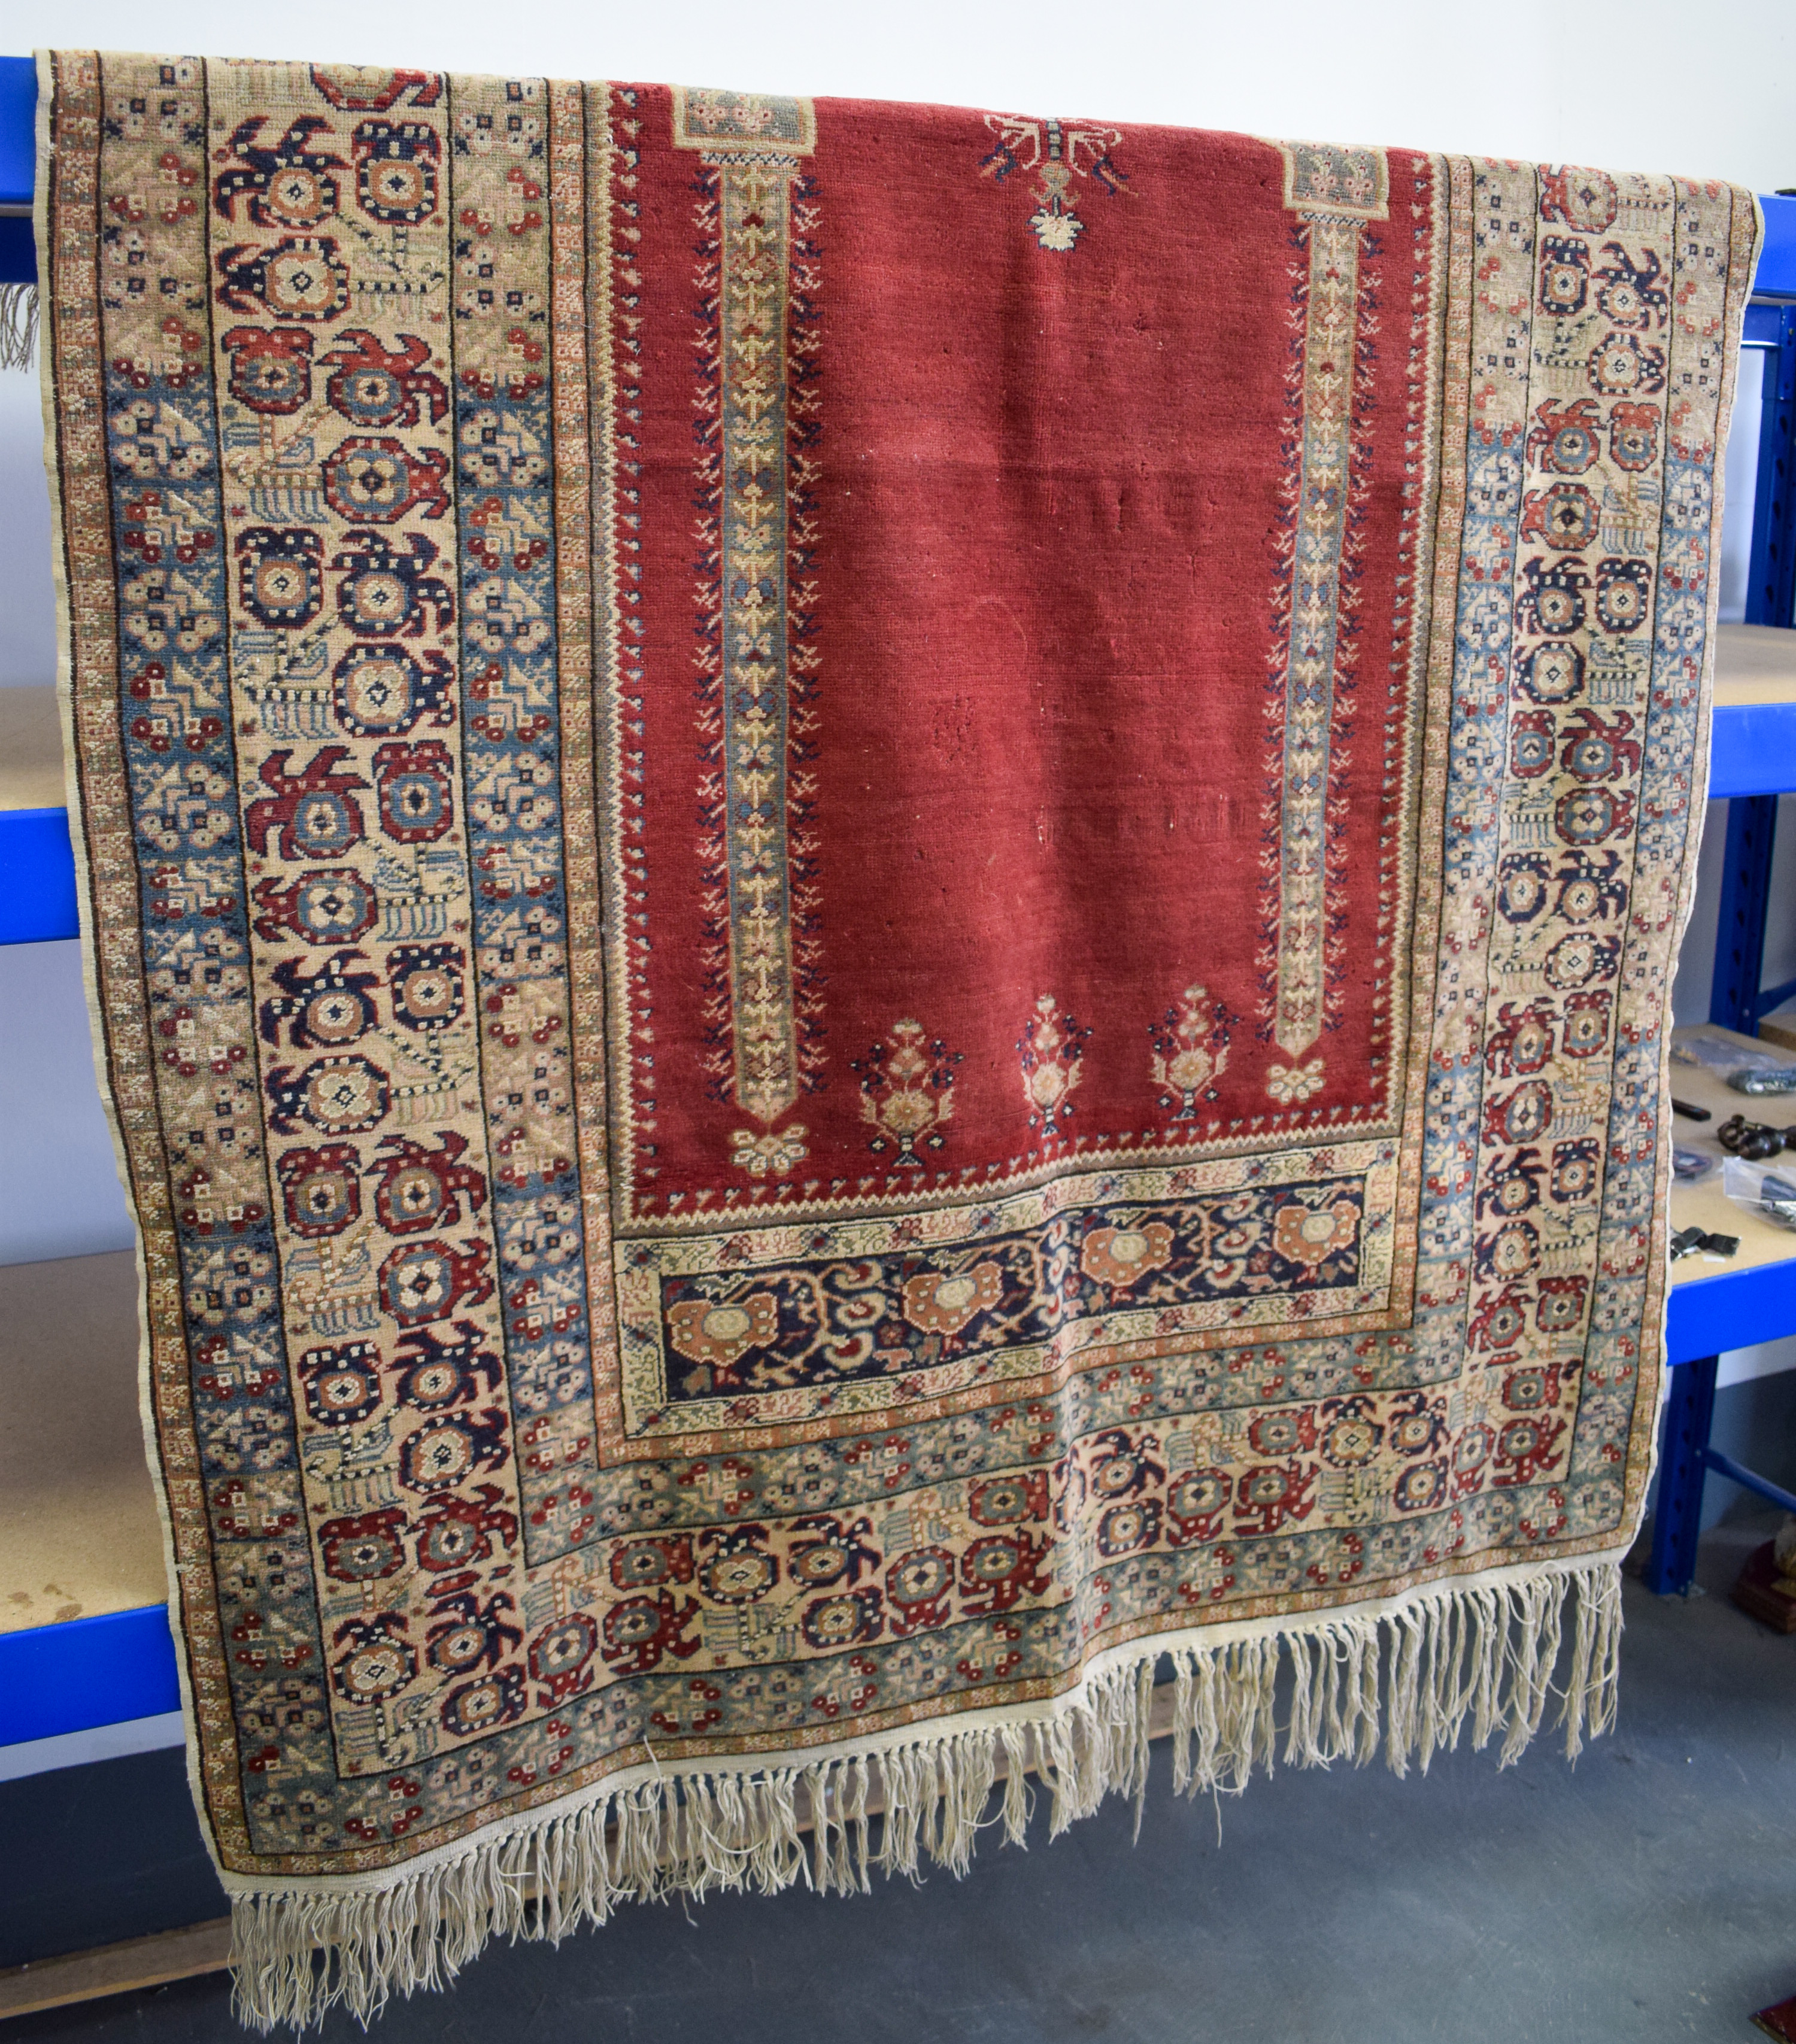 AN EARLY 20TH CENTURY MIDDLE EASTERN SILK PRAYER RUG decorated with motifs. 190 cm x 123 cm.